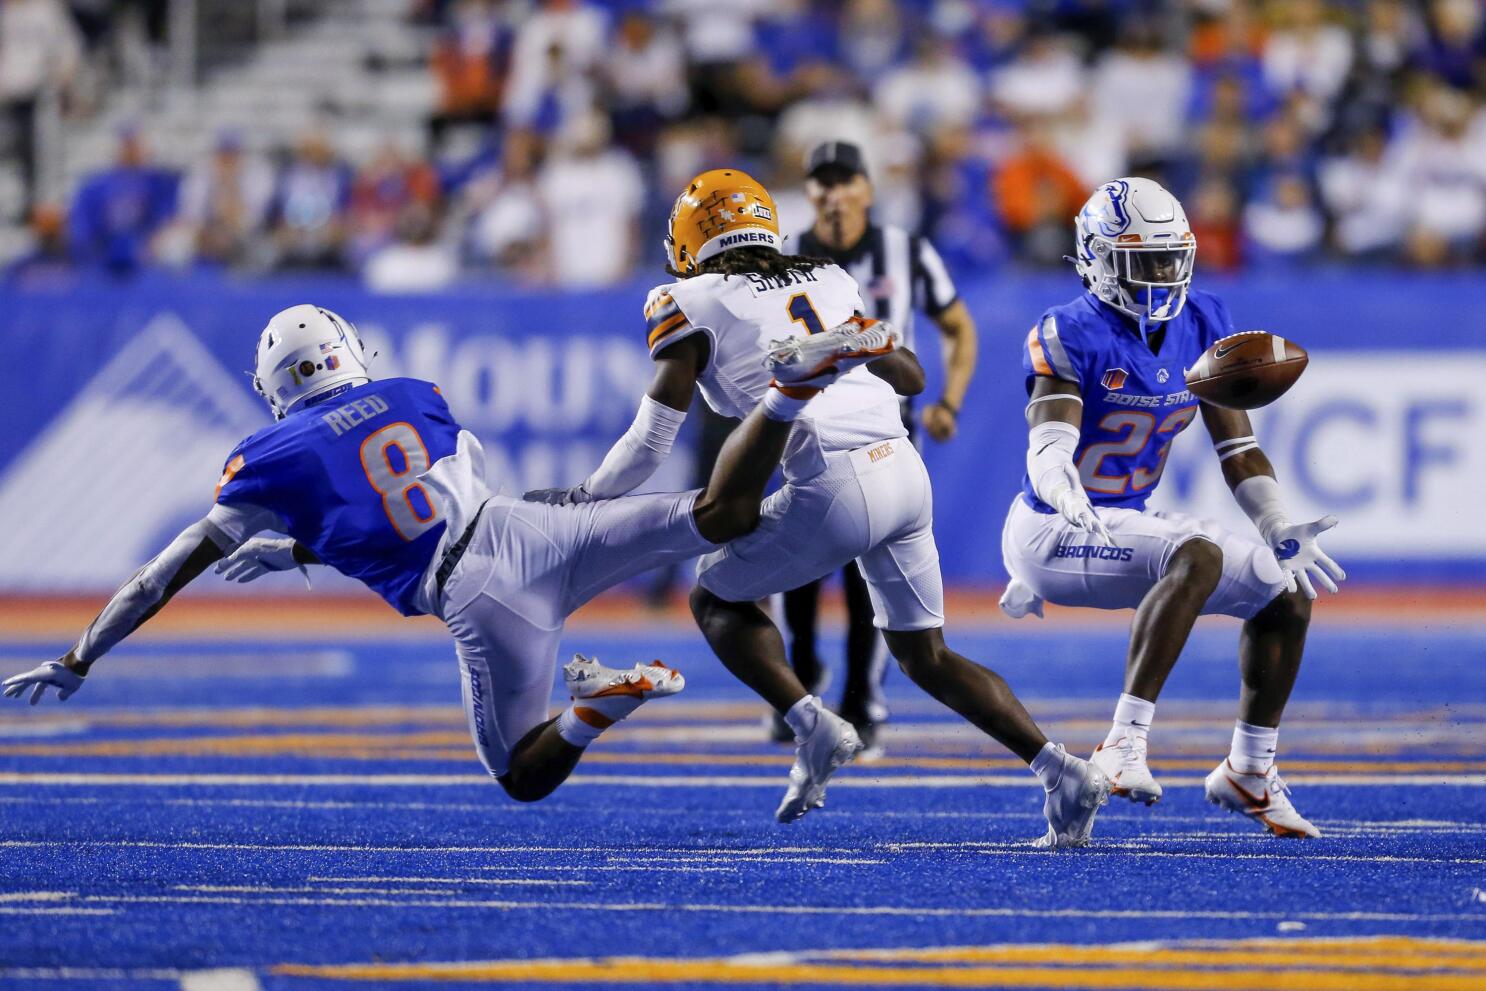 Bachmeier, Cobbs lead Boise State past UTEP, 54-13